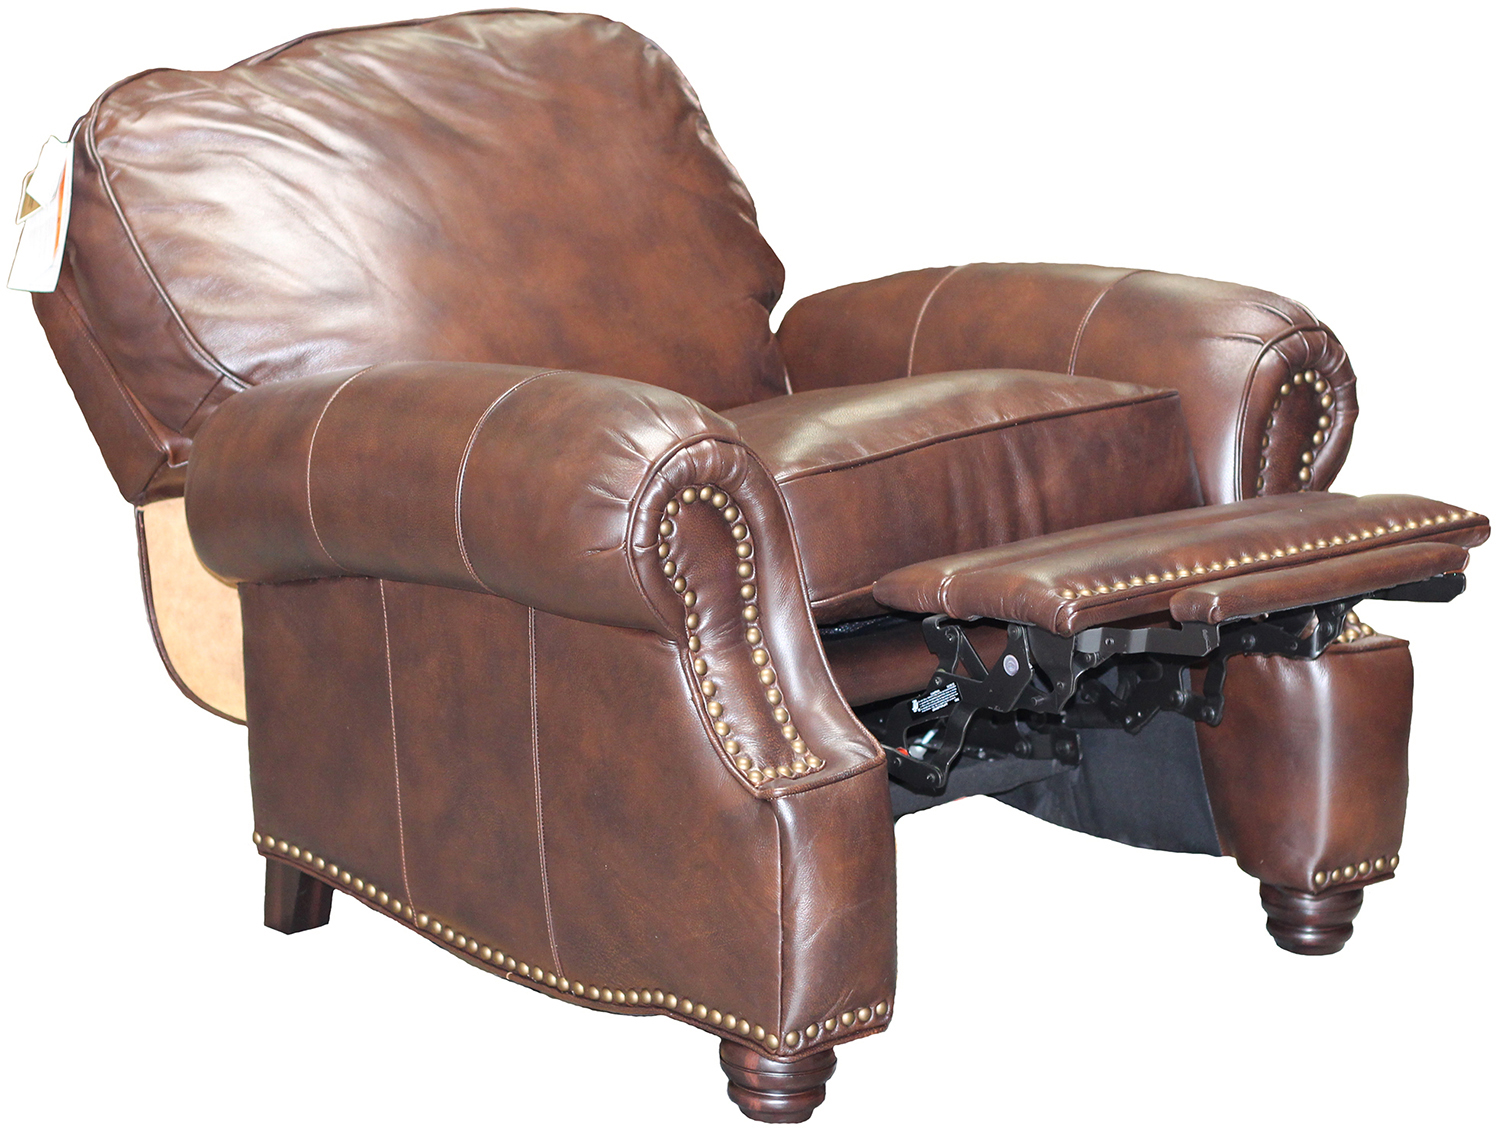 Barcalounger Neptune II Home Office Desk Chair Recliner - Leather Recliner  Chair Furniture - Lounge Chair. Recliners, Chairs, Sofas, Office Chairs and  other Furniture.